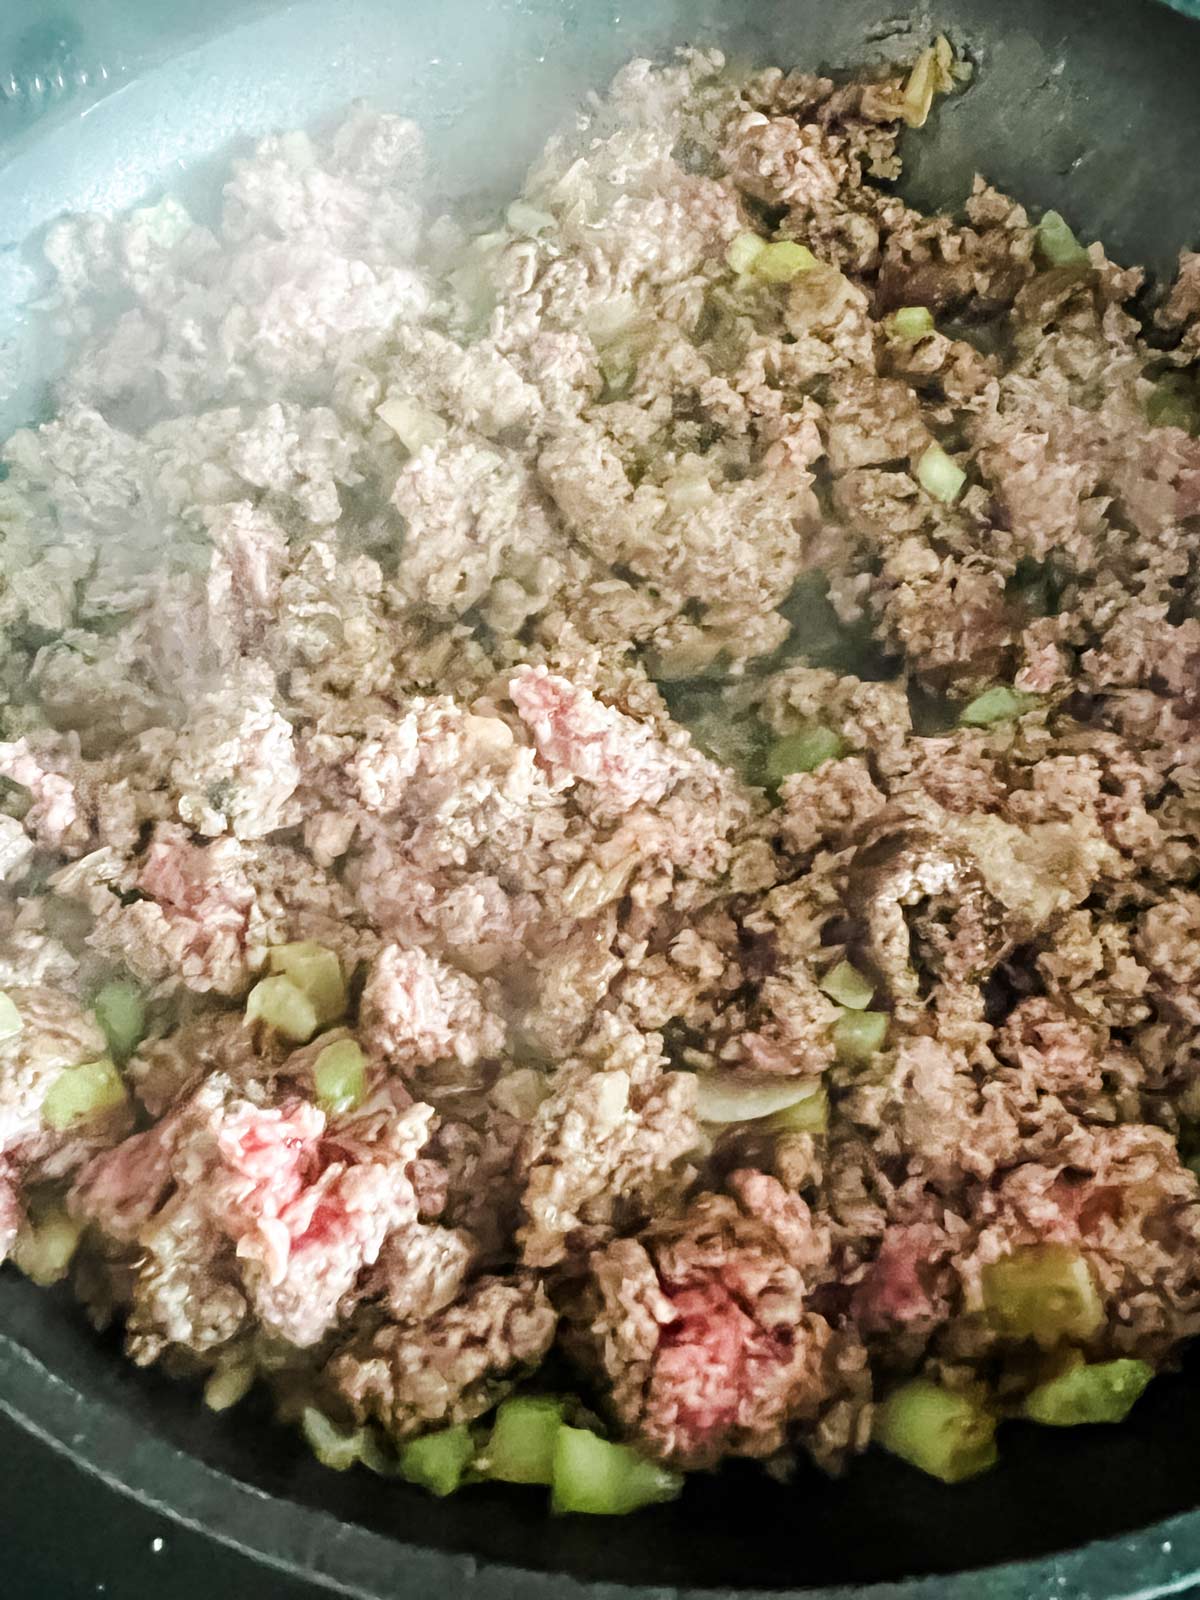 Ground beef being browned with onion and celery in a skillet.